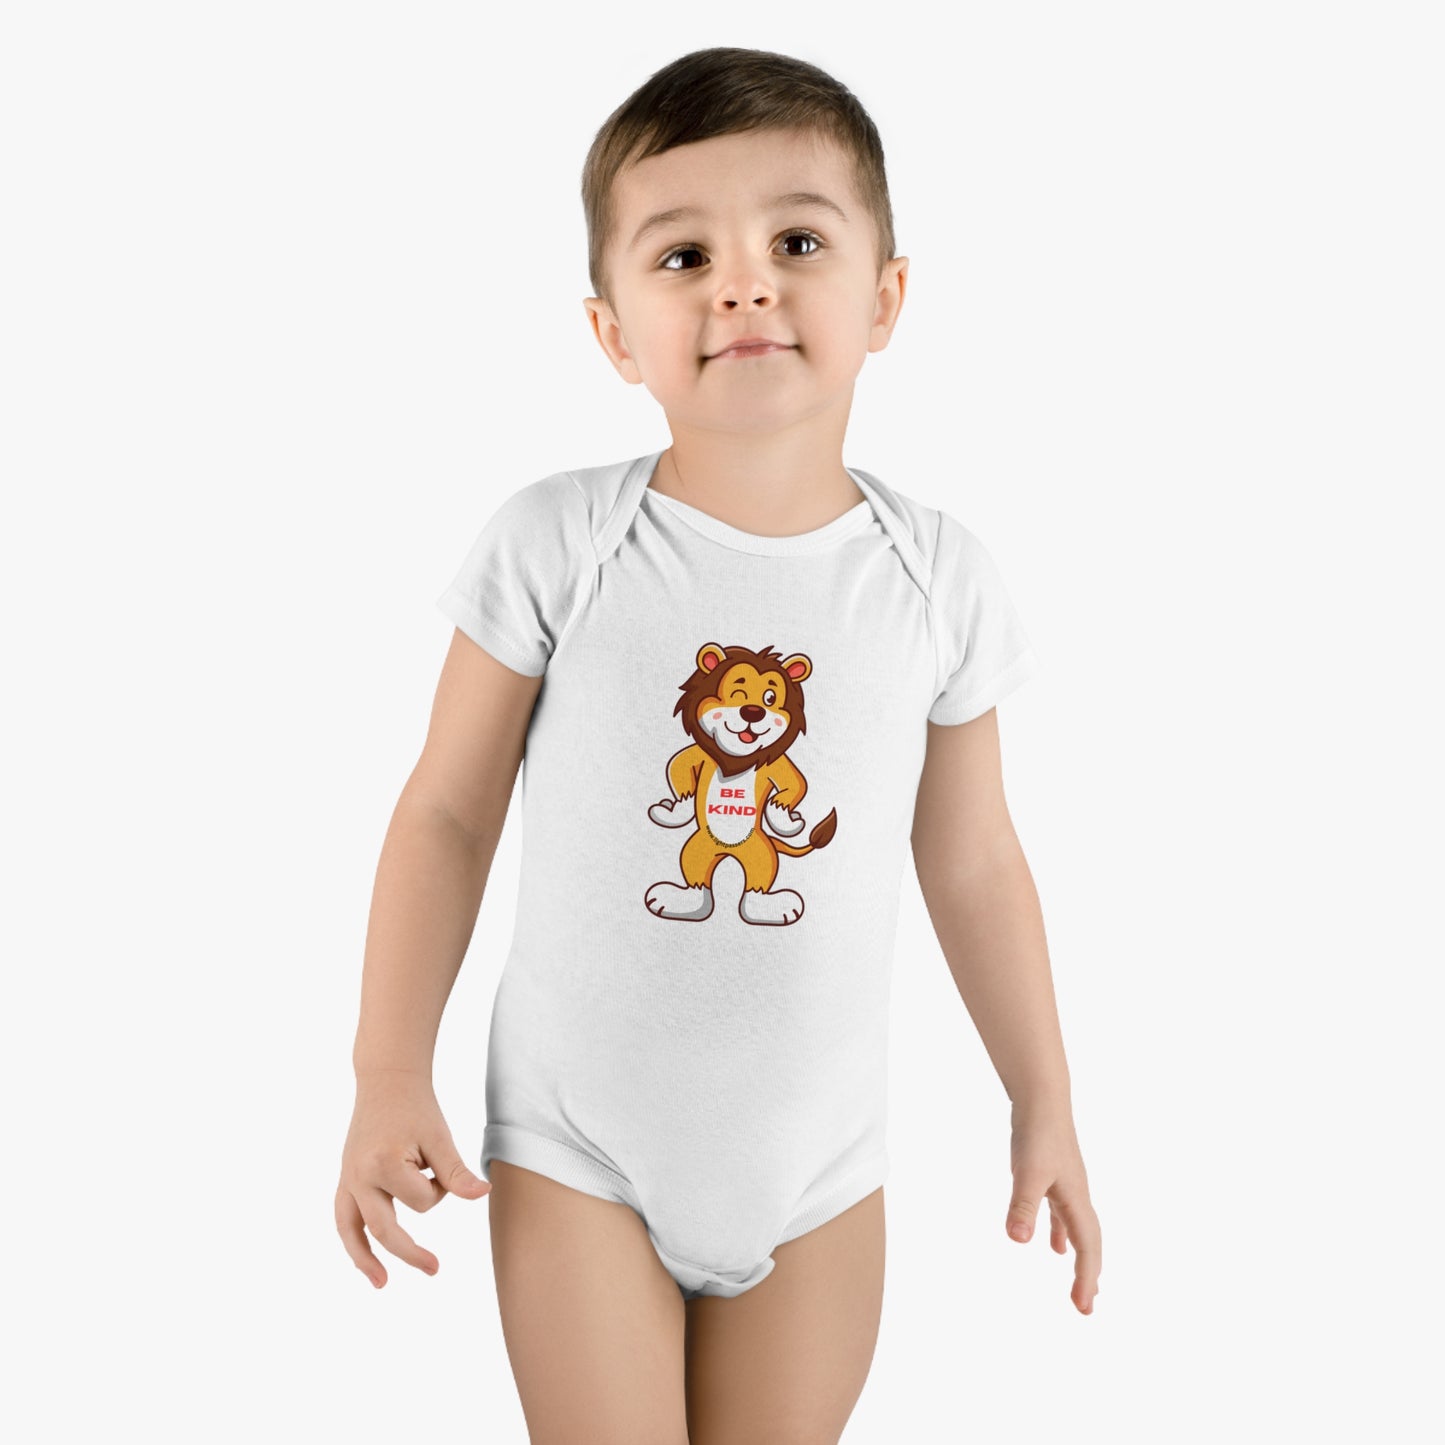 Light Passers Marketplace Be Kind Lion Onesie® Organic Baby Bodysuit in white, T-shirts, Simple Messages, Mental Health